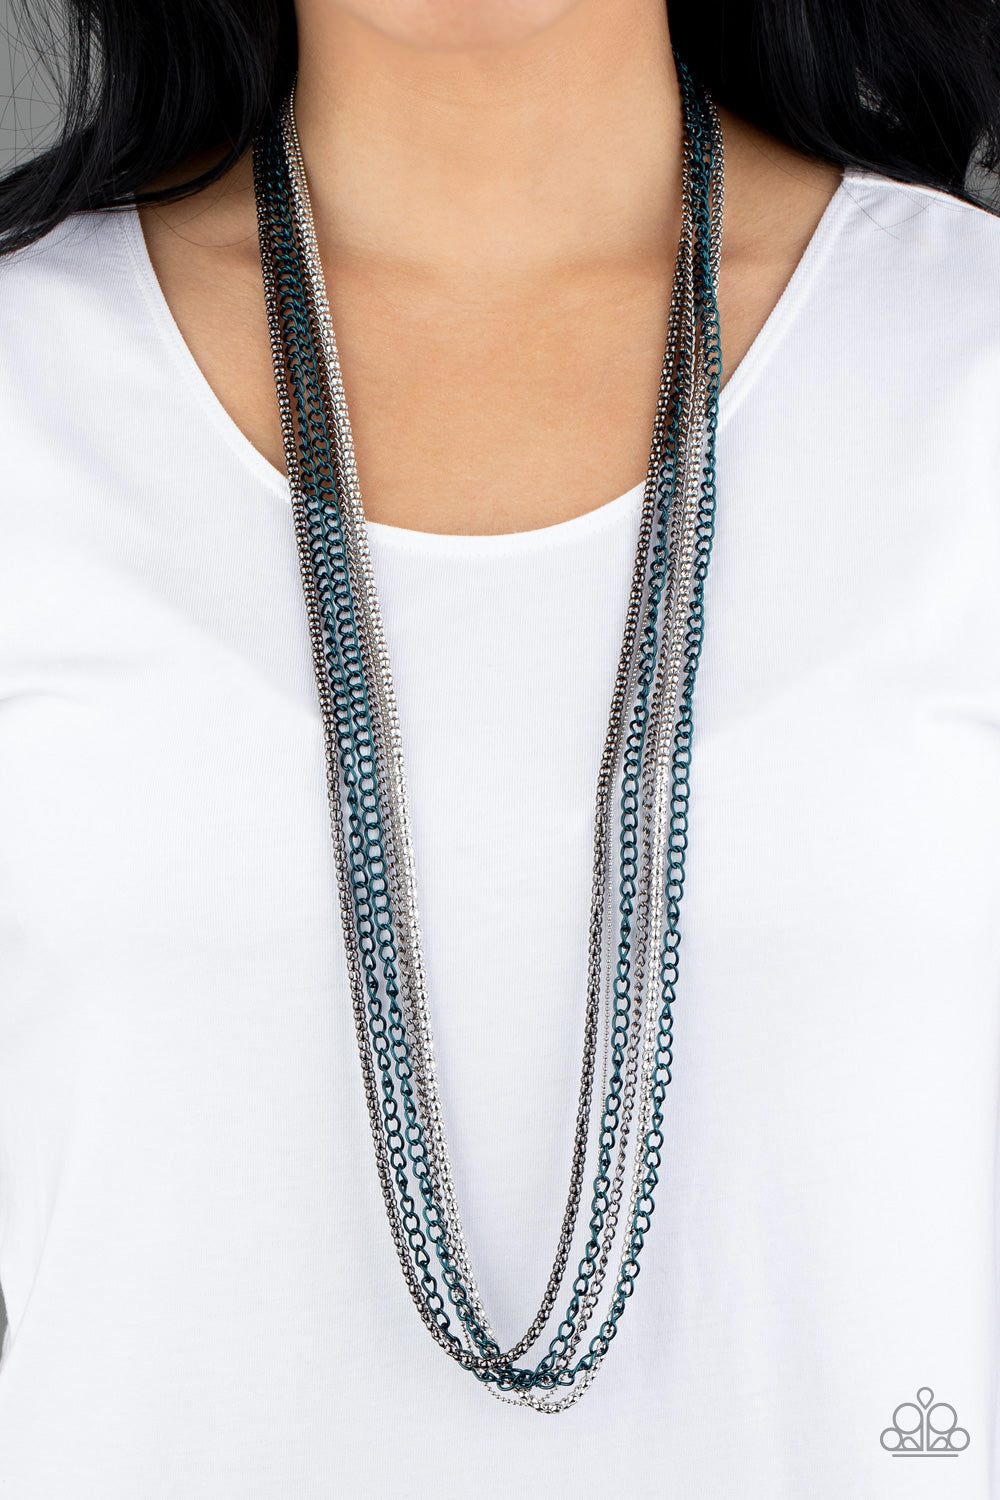 Paparazzi Accessories - Colorful Calamity - Blue Necklace